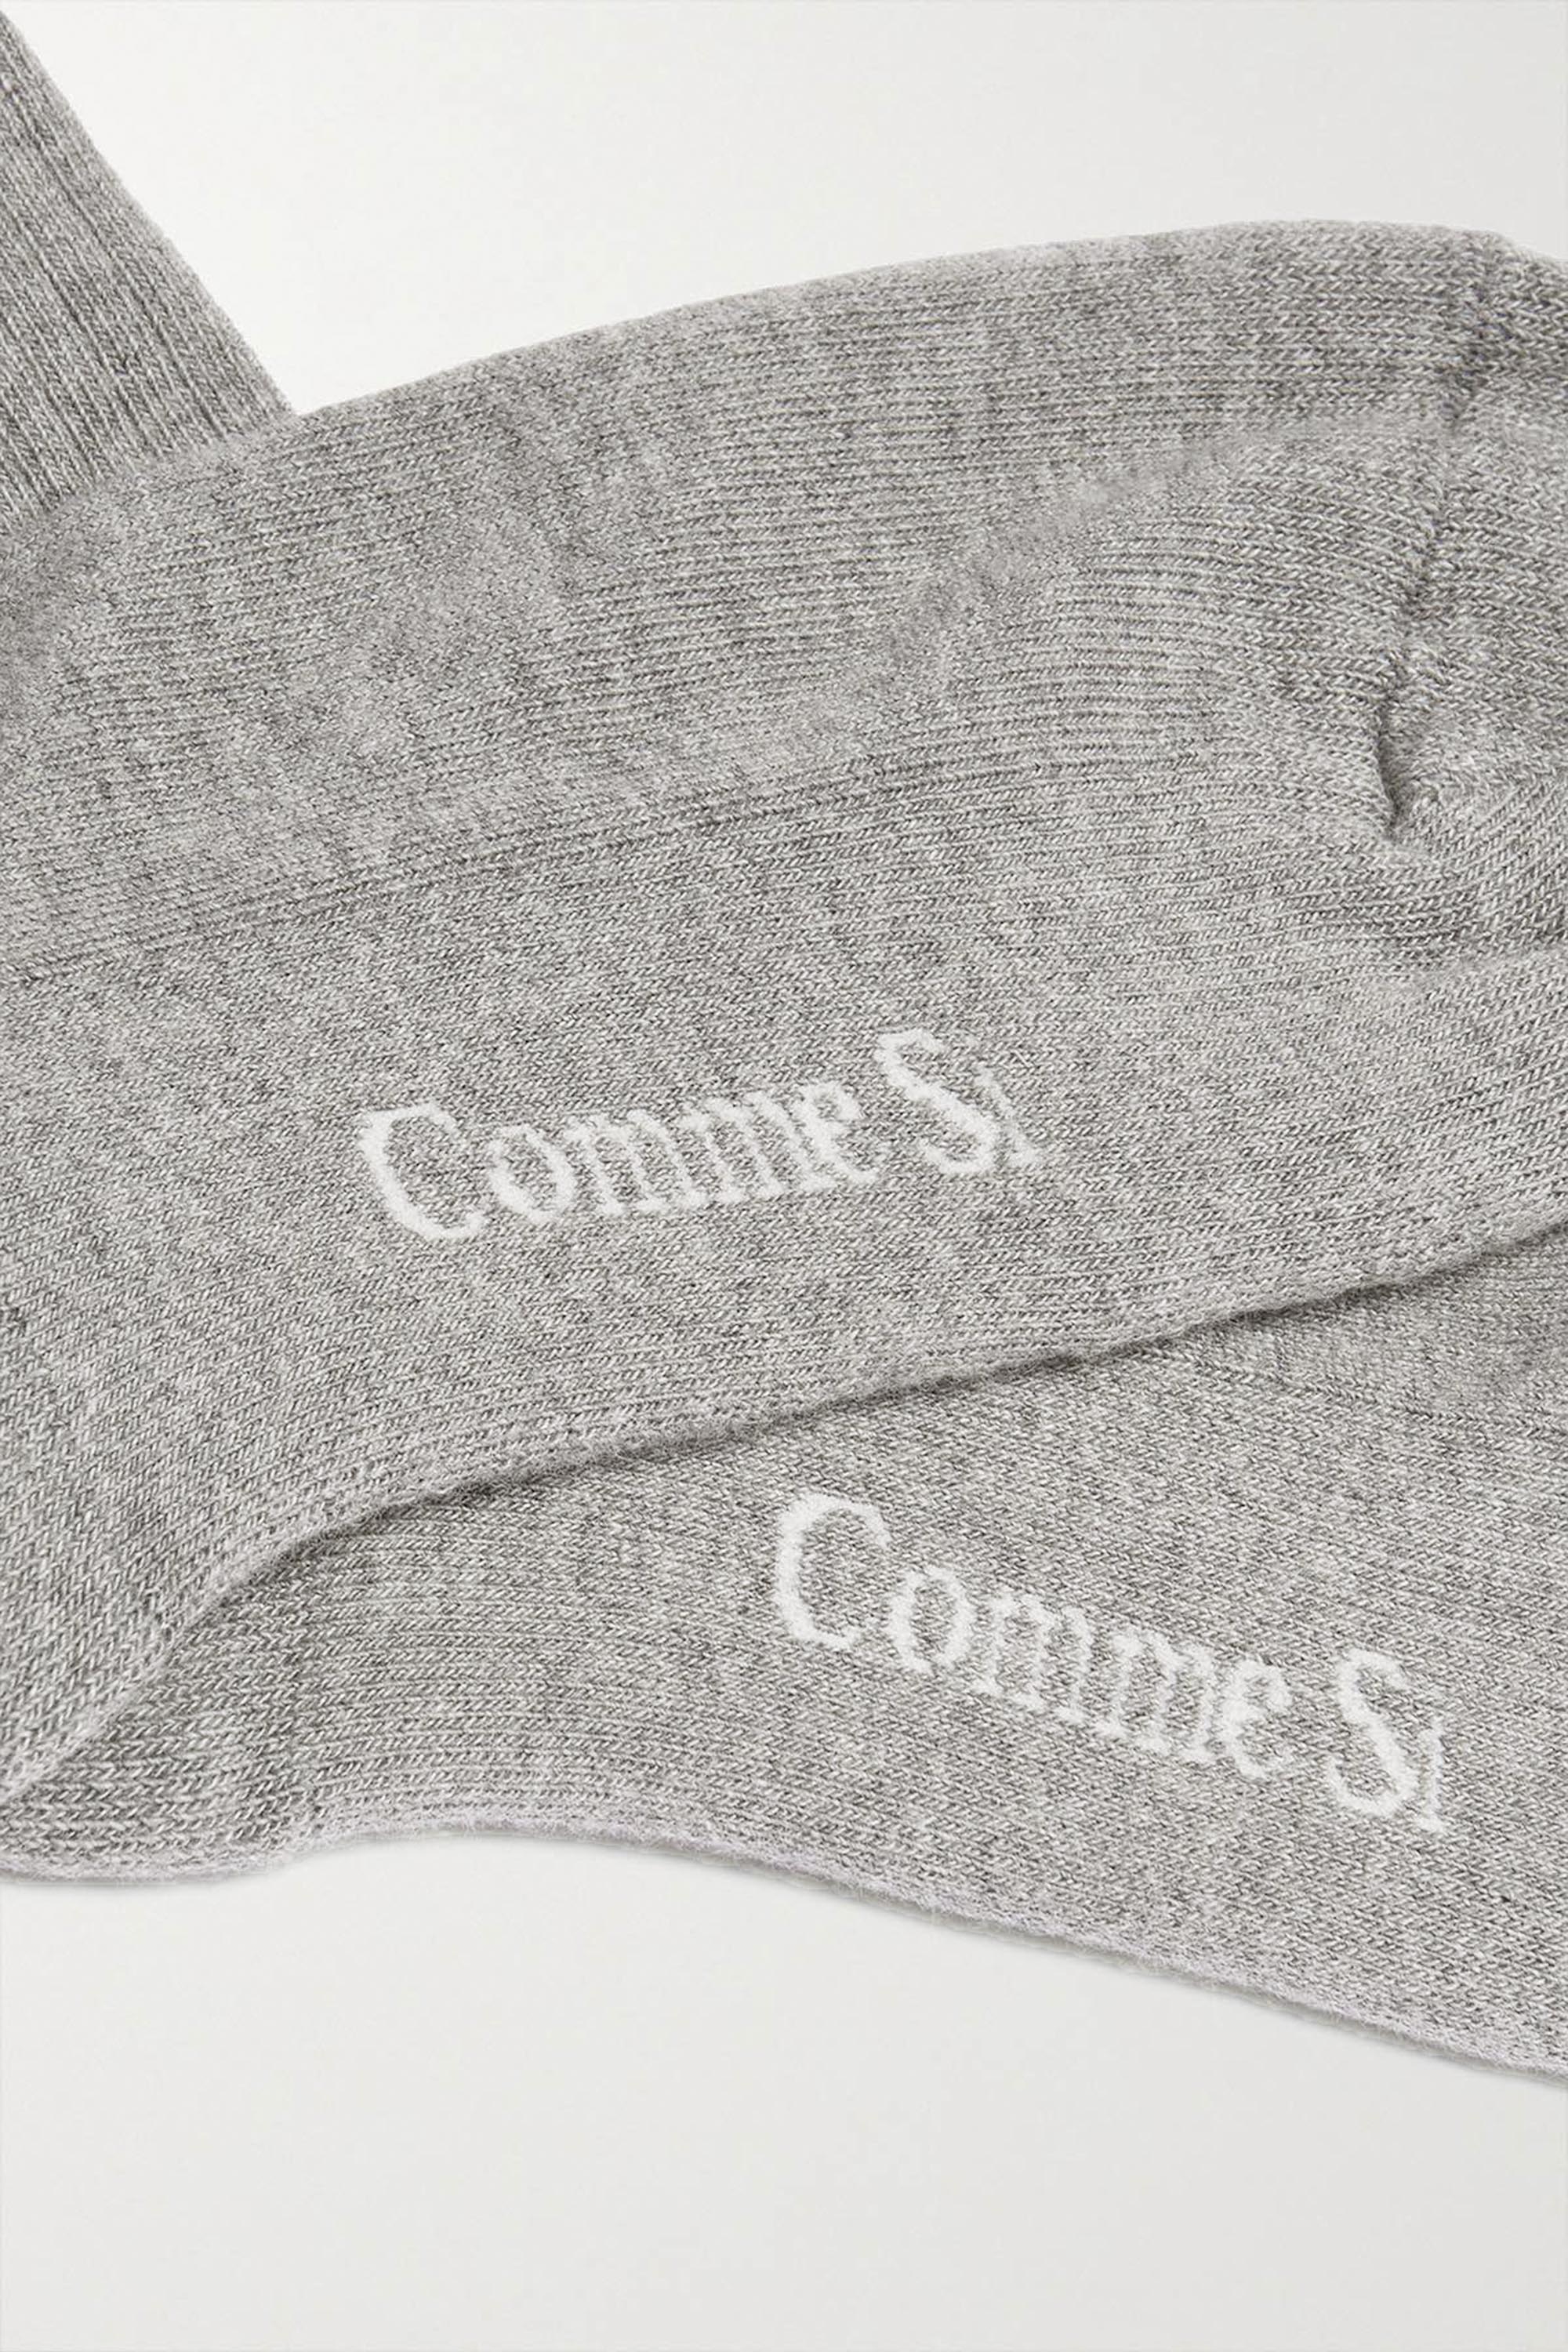 Footbed detail of the tube sock in Heather Grey, GOTS certified Organic Cotton, by Comme Si